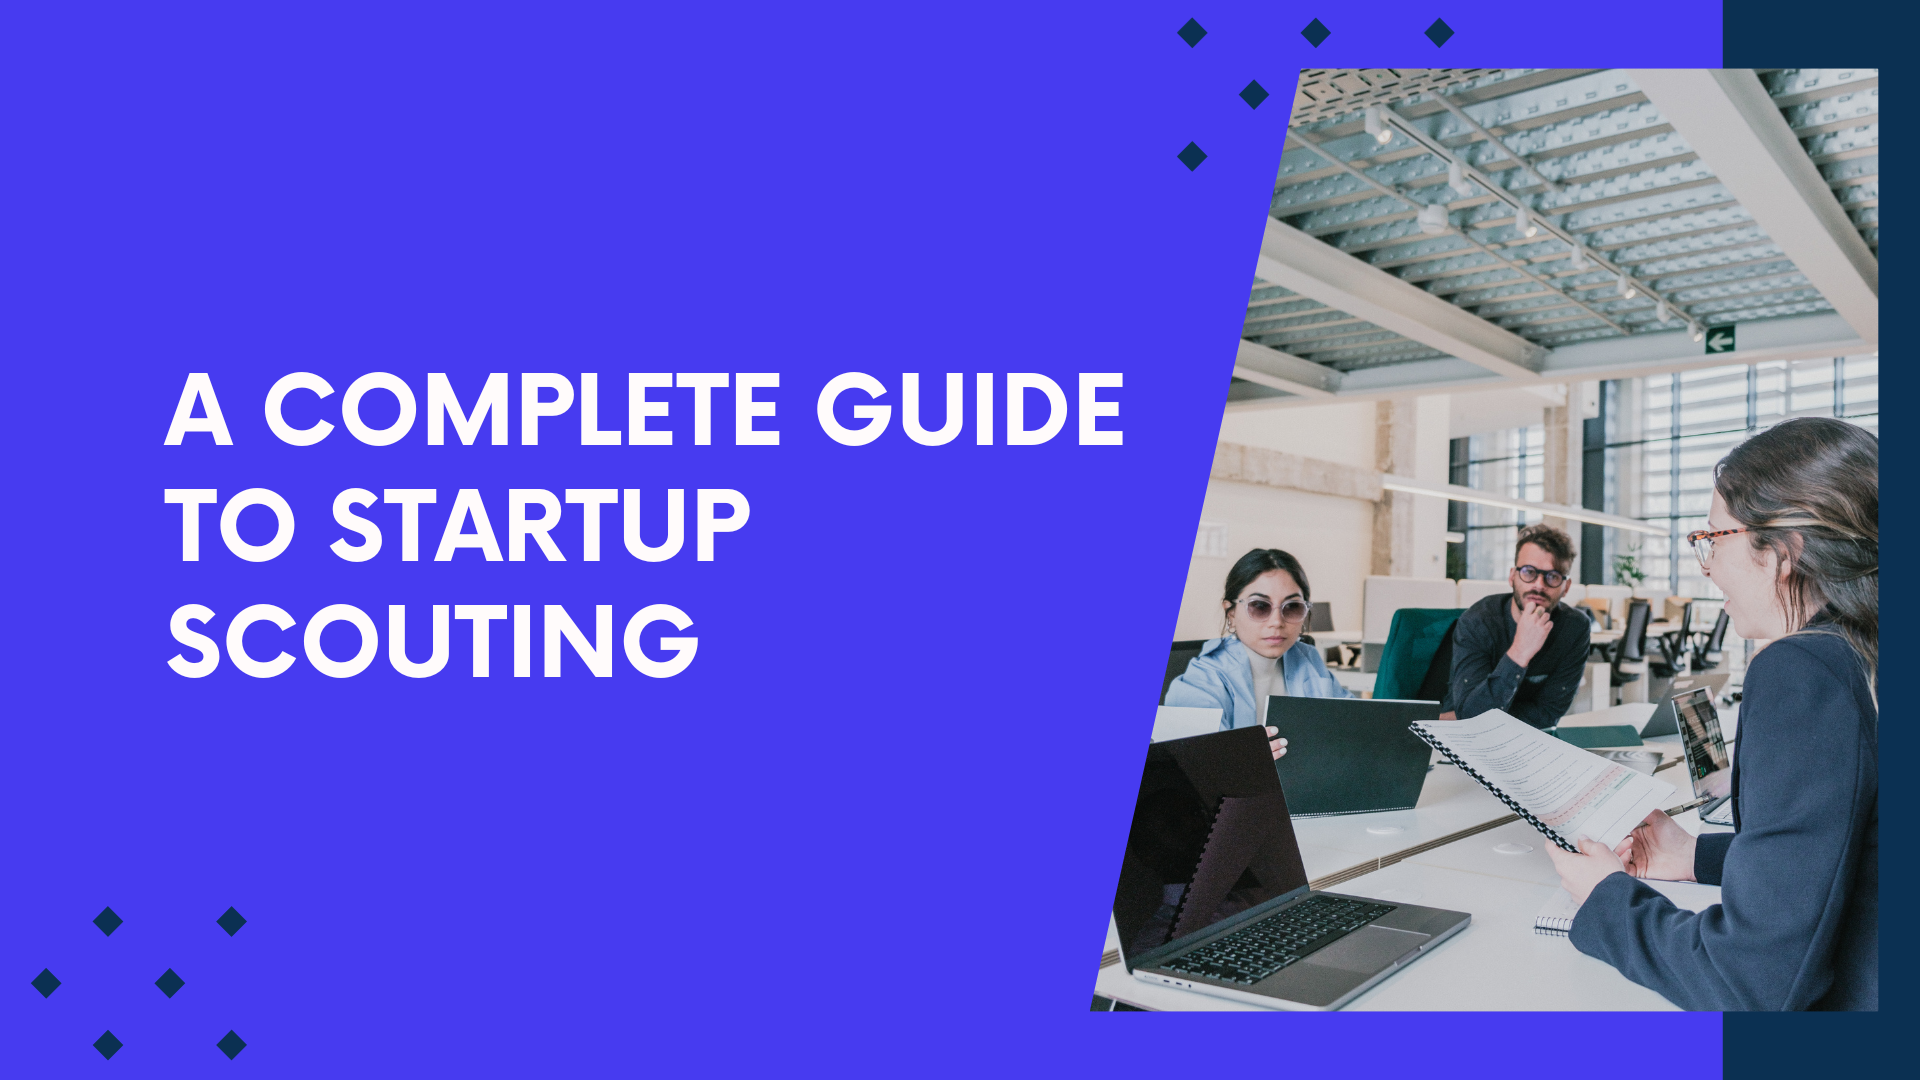 A Complete Guide to Startup Scouting